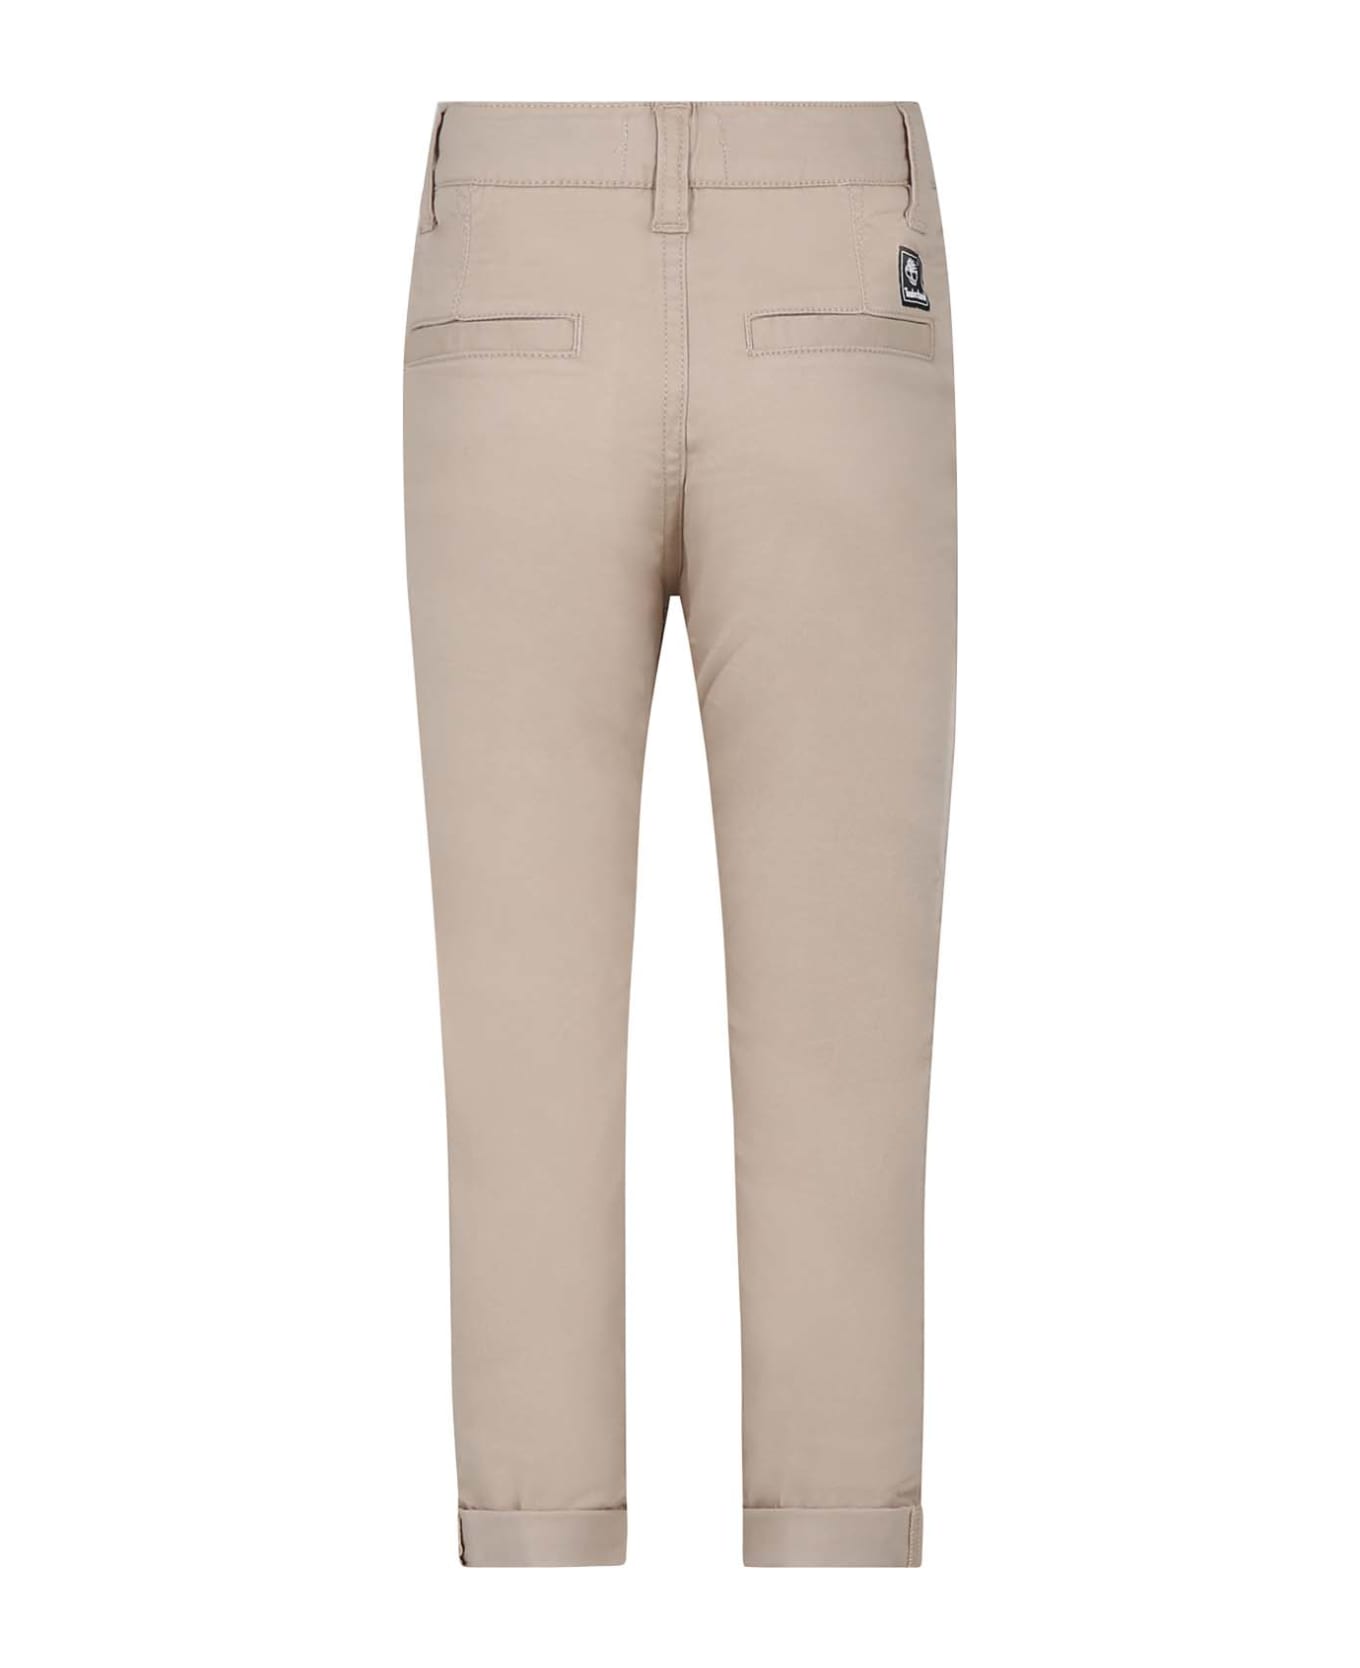 Timberland Beige Casual Trousers For Boy - Beige